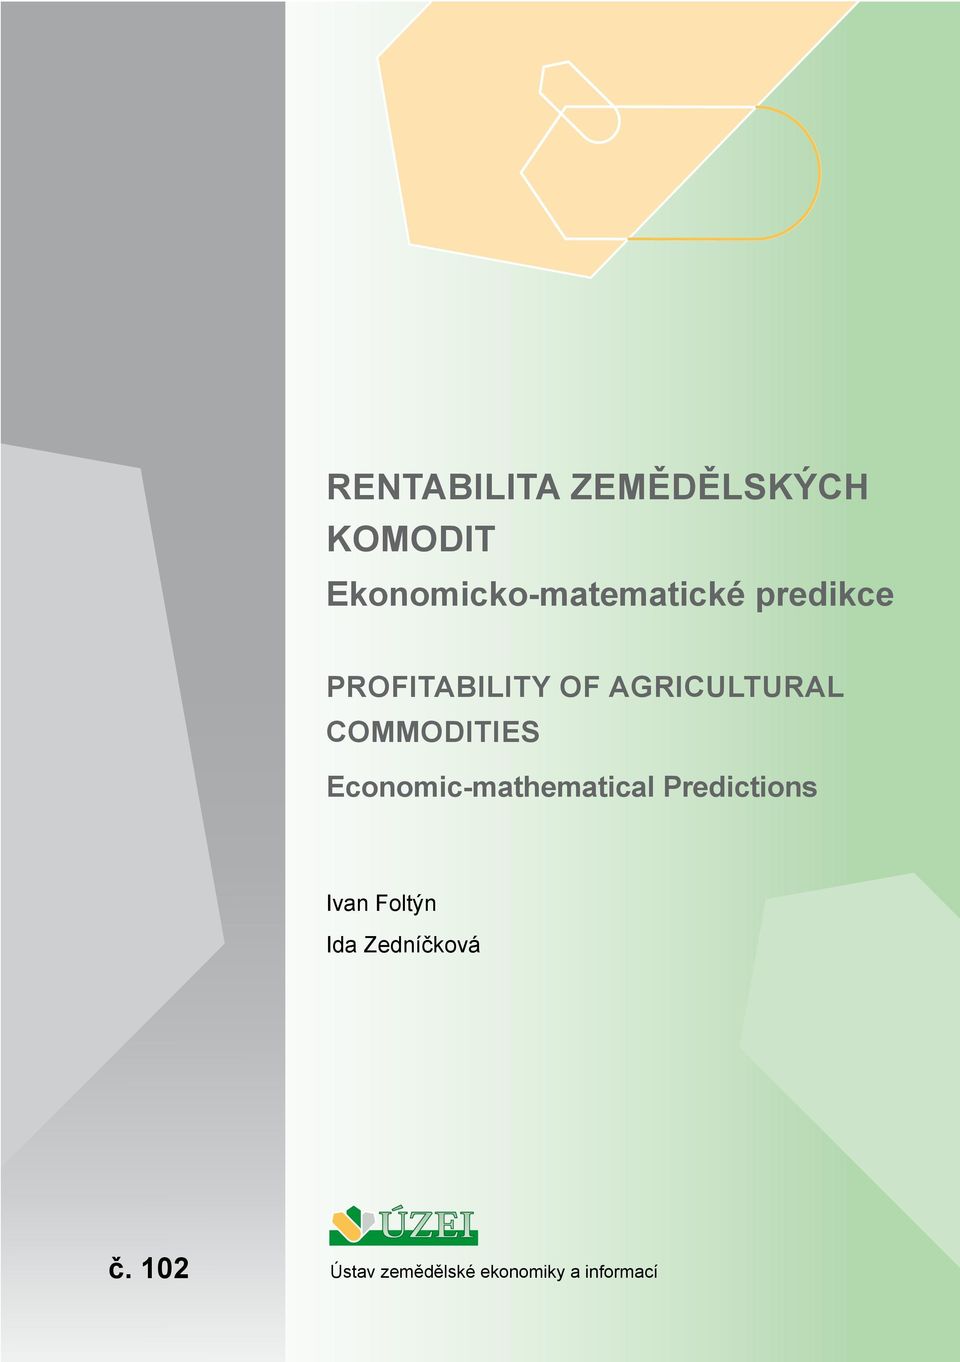 AGRICULTURAL COMMODITIES Economic-mathematical